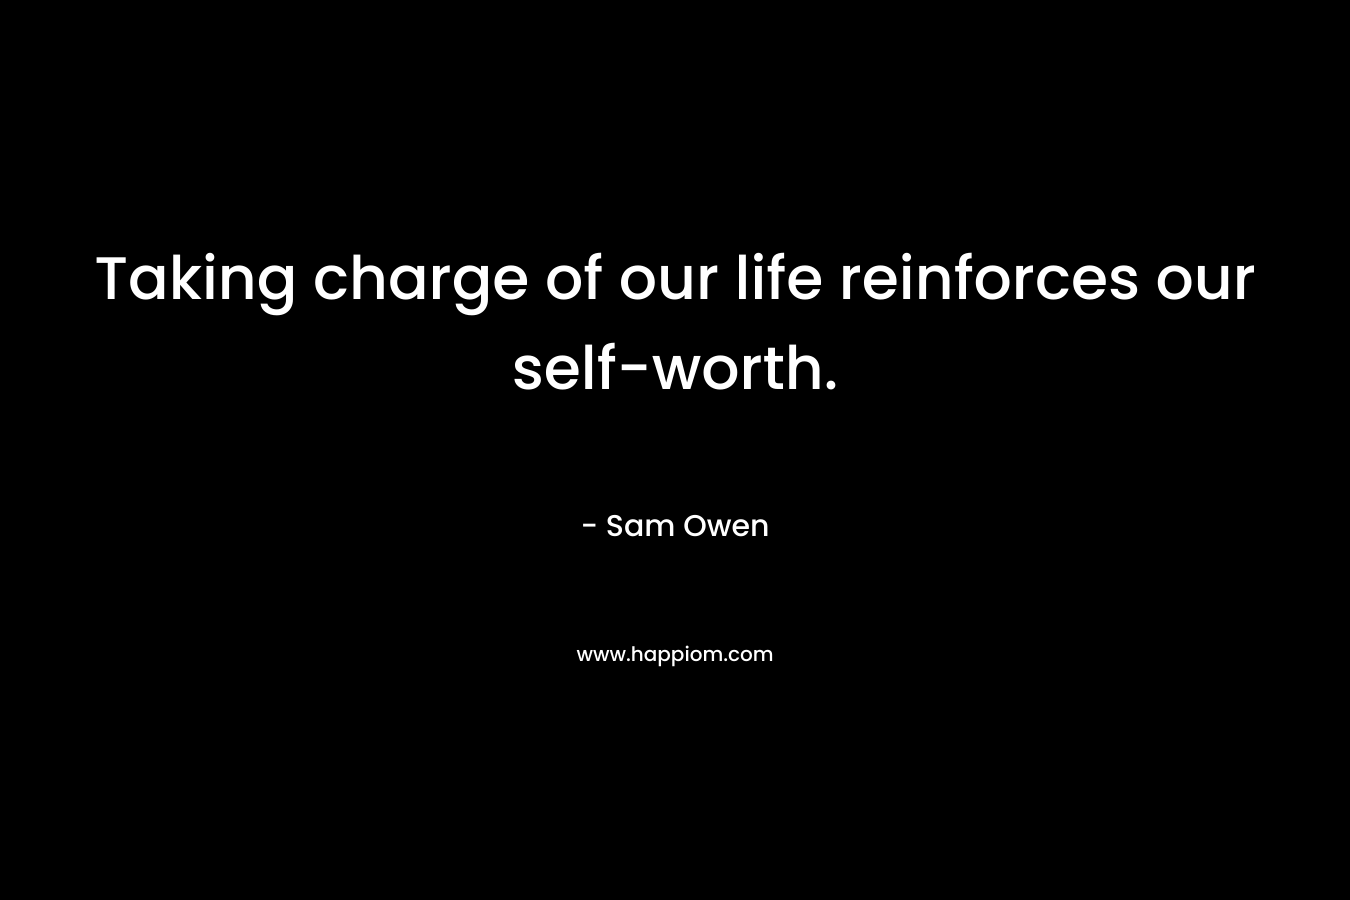 Taking charge of our life reinforces our self-worth. – Sam Owen